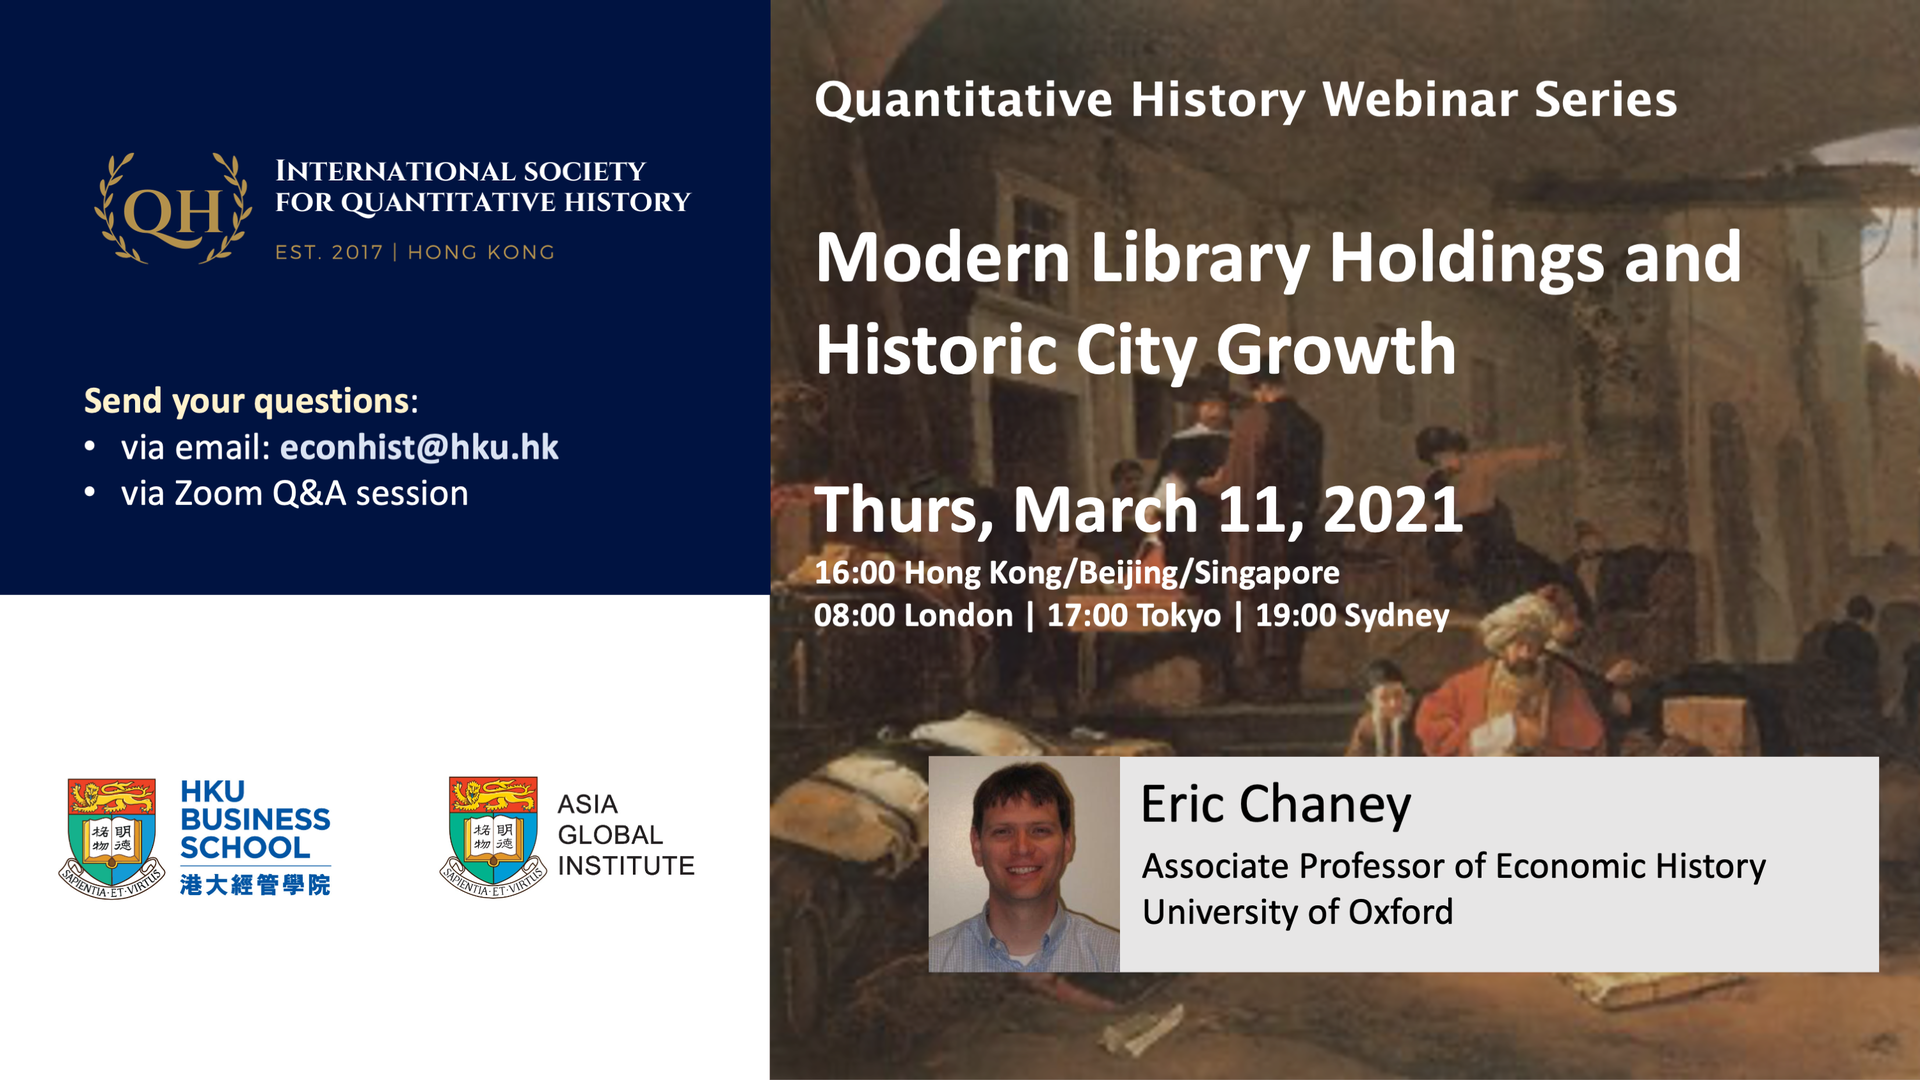 Quantitative History Webinar Series - Modern Library Holdings and Historic City Growth by Eric Chaney (Oxford)